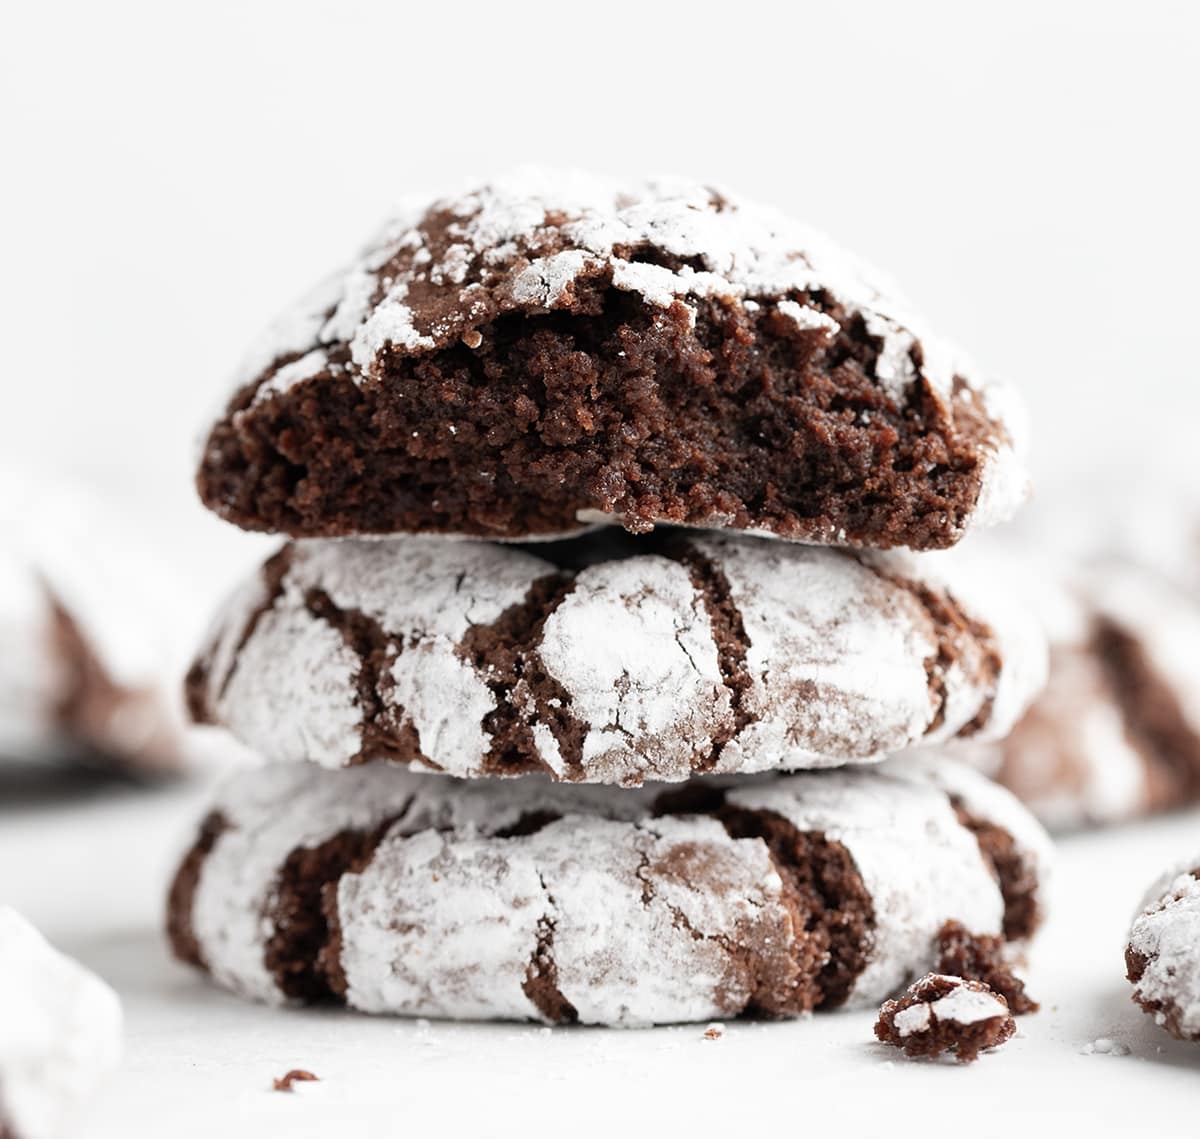 Stack of Chocolate Crinkle Cookies with top cookie halved showing inside texture.